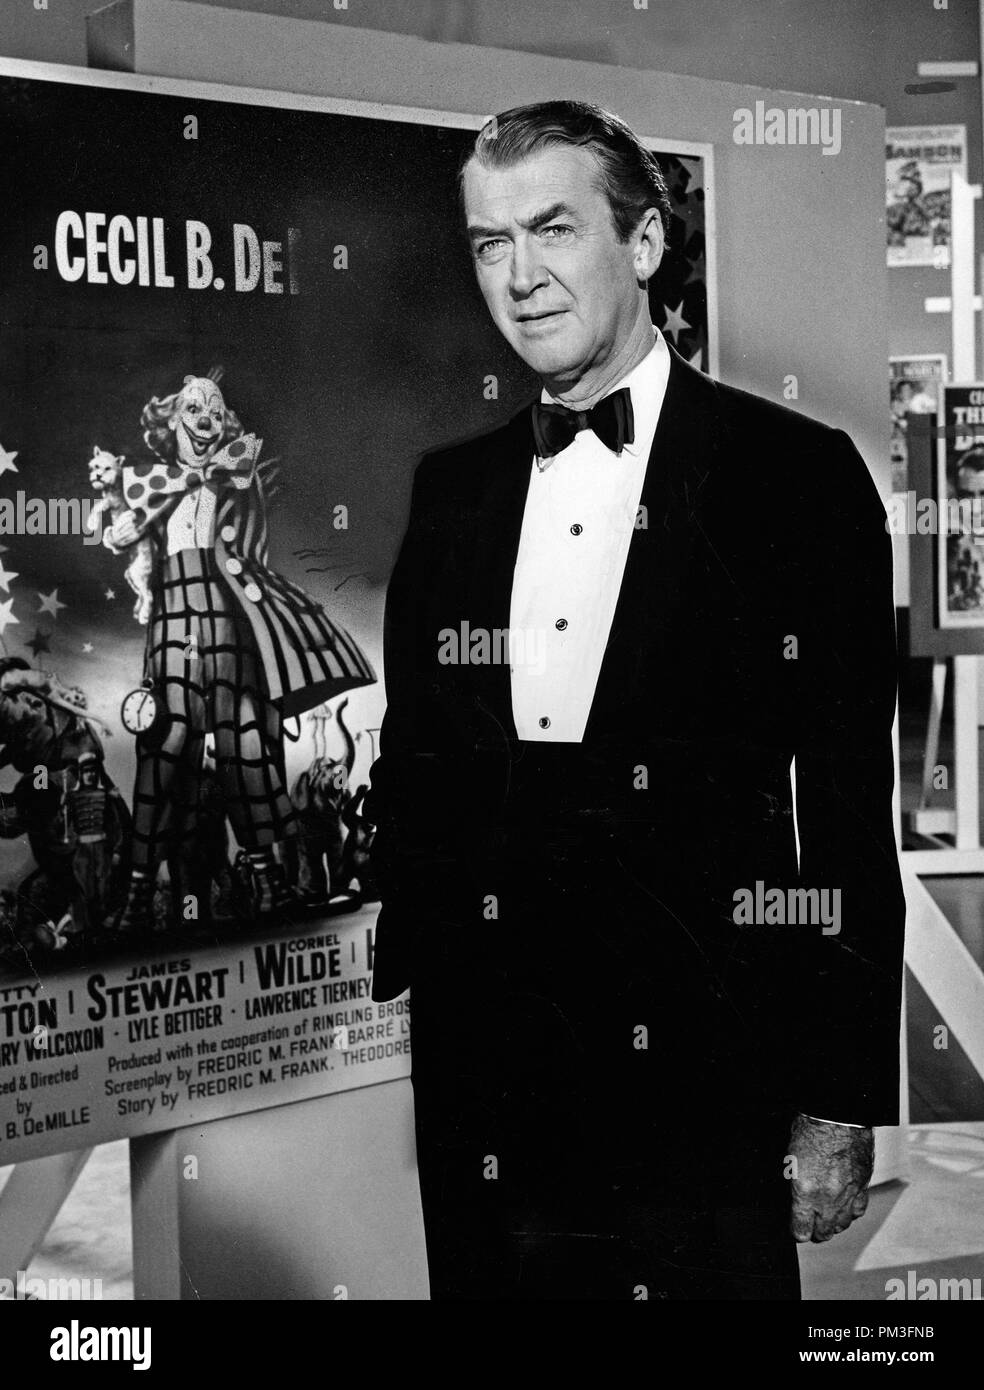 Studio Publicity Still: 'The World's Greatest Showman: The Legend of Cecile B. DeMille'  James Stewart   1963   File Reference # 30732 1278THA Stock Photo